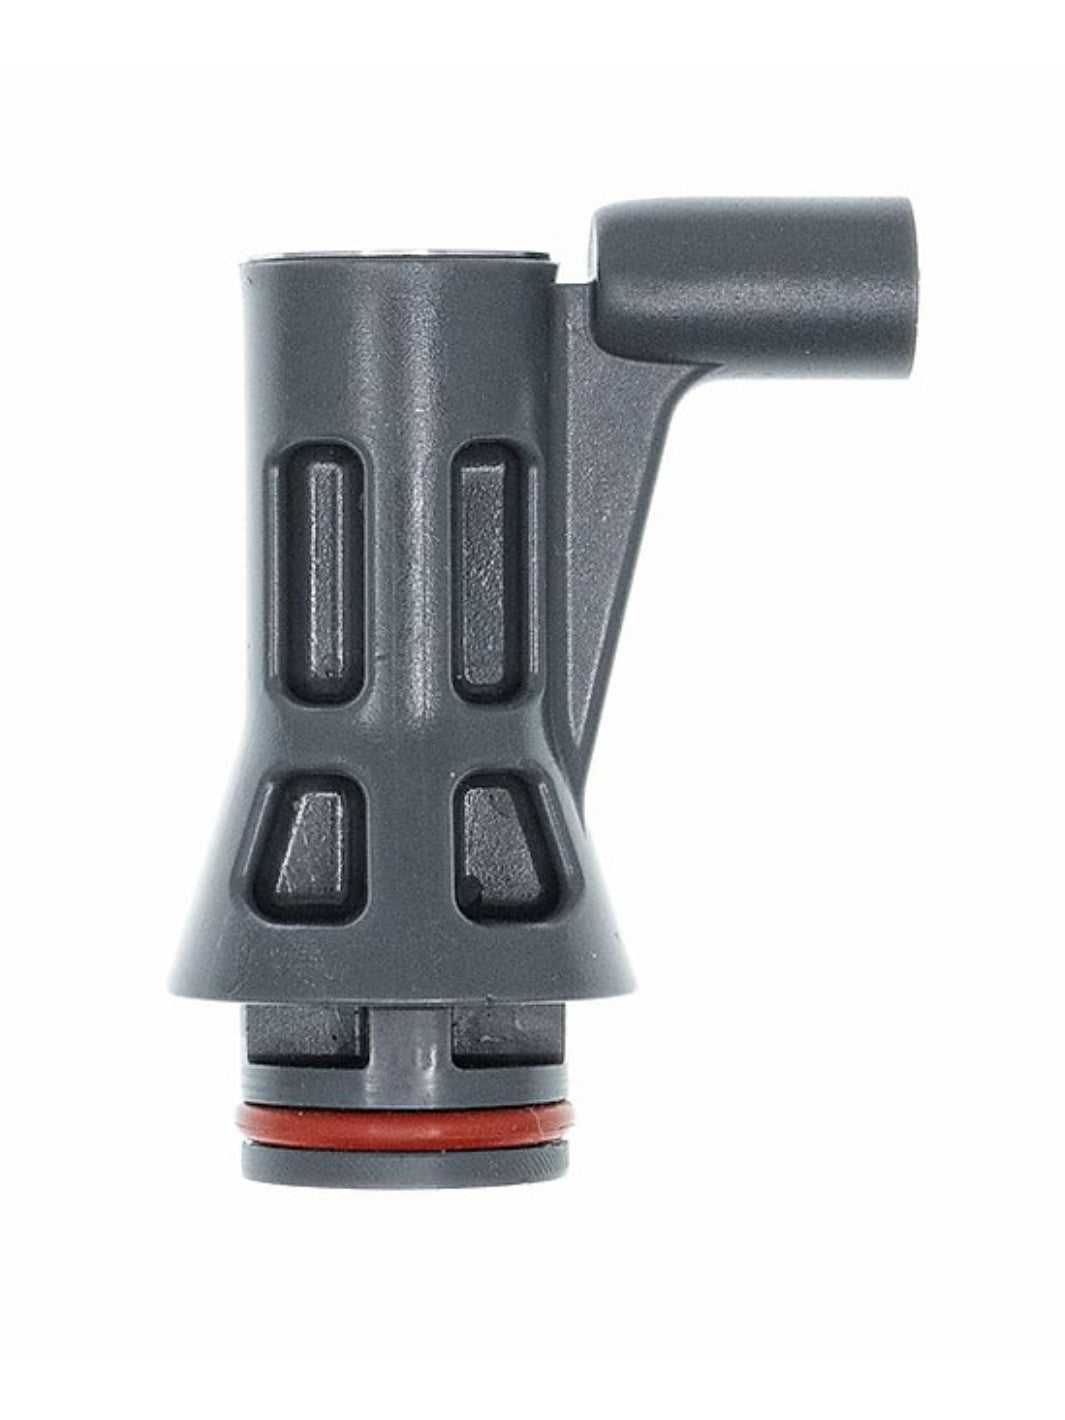 FLAIR PRO 2 Replacement Plunger Stem